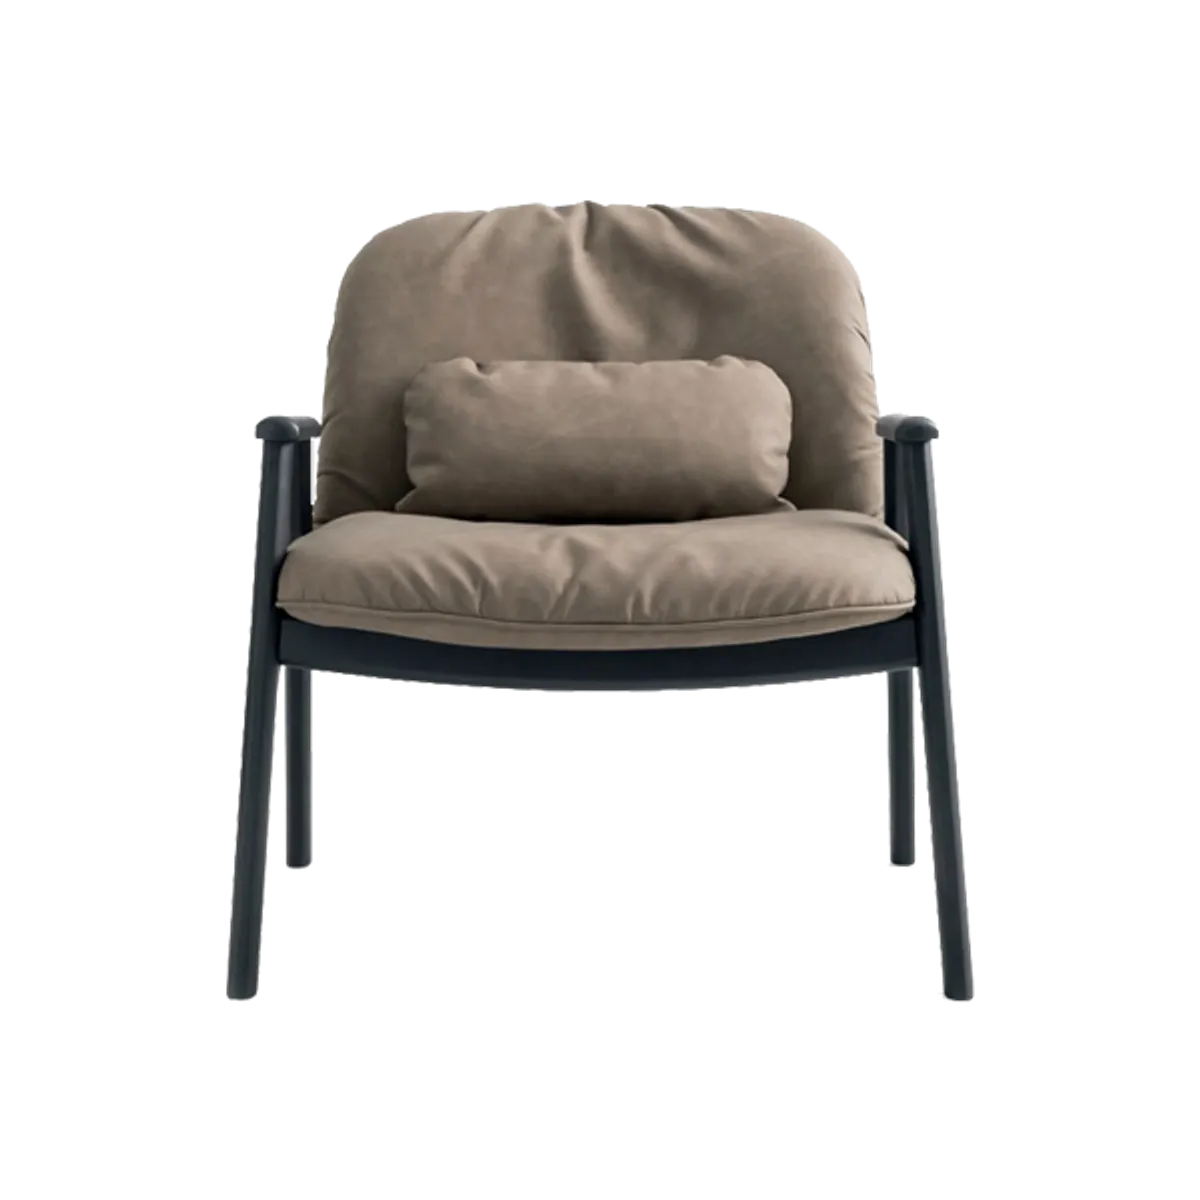 Baltimora Armchair Inside Out Contracts